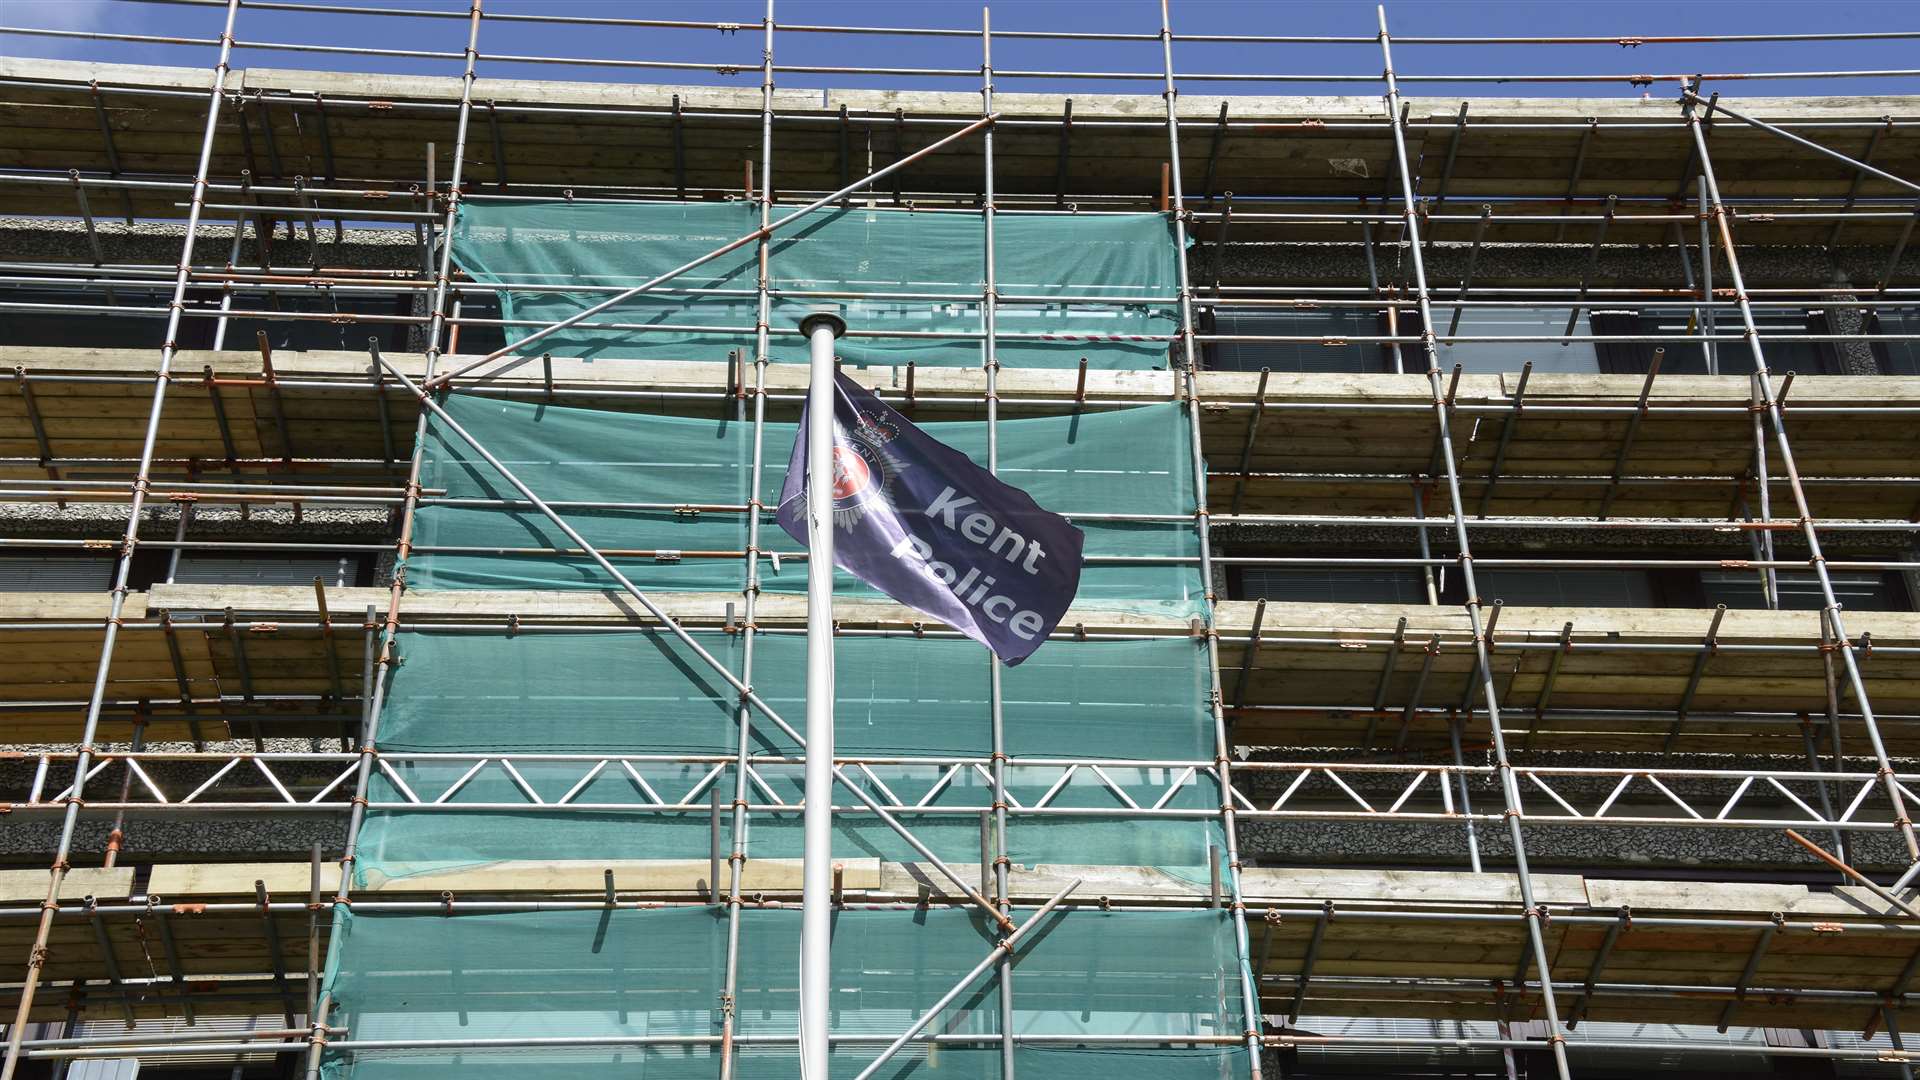 Ashford Police Station is covered in scaffolding